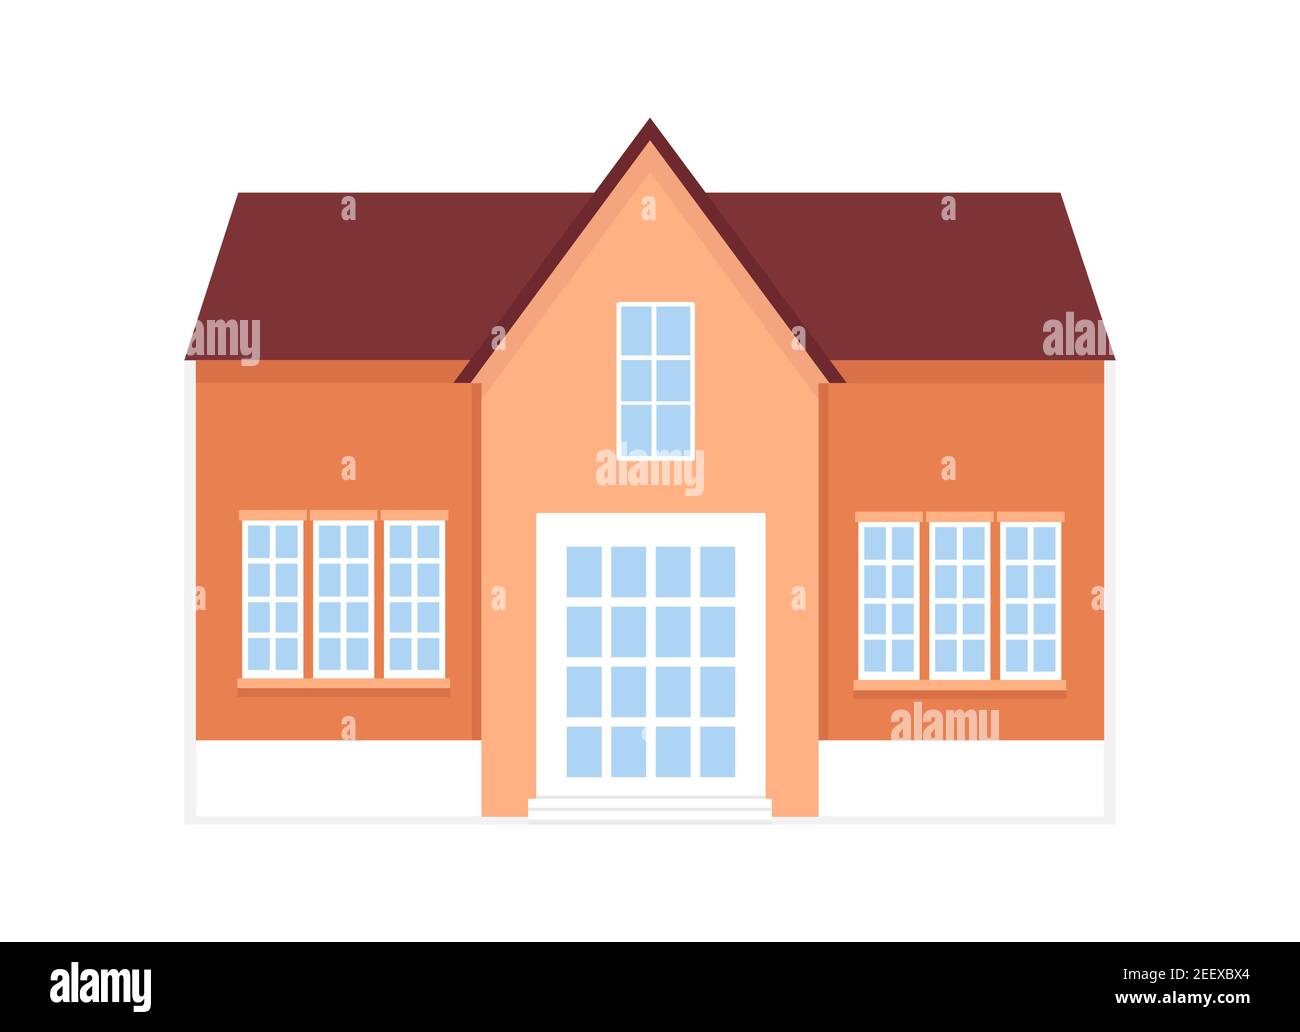 Beige and orange Cottage with Facade, City or Country Street Building with white windows. Modern Residential Private property, duplex apartments. Stock Vector